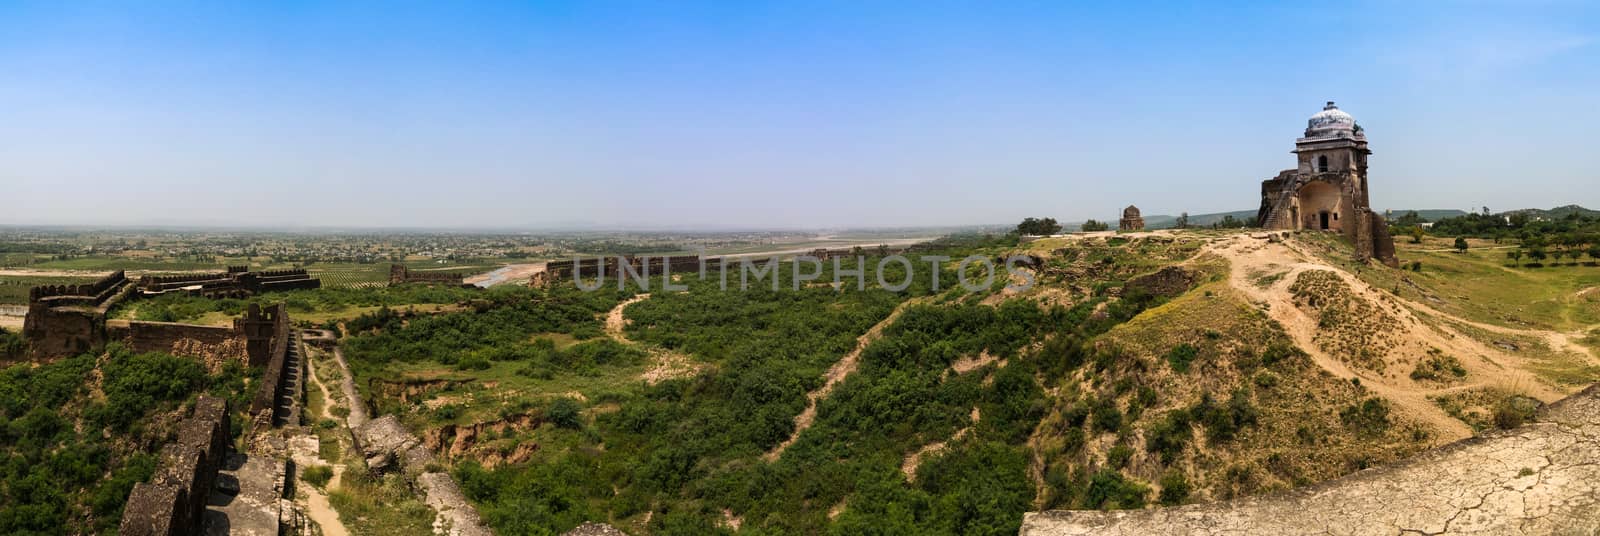 Panorama of Rohtas fortress in Punjab Pakistan by homocosmicos